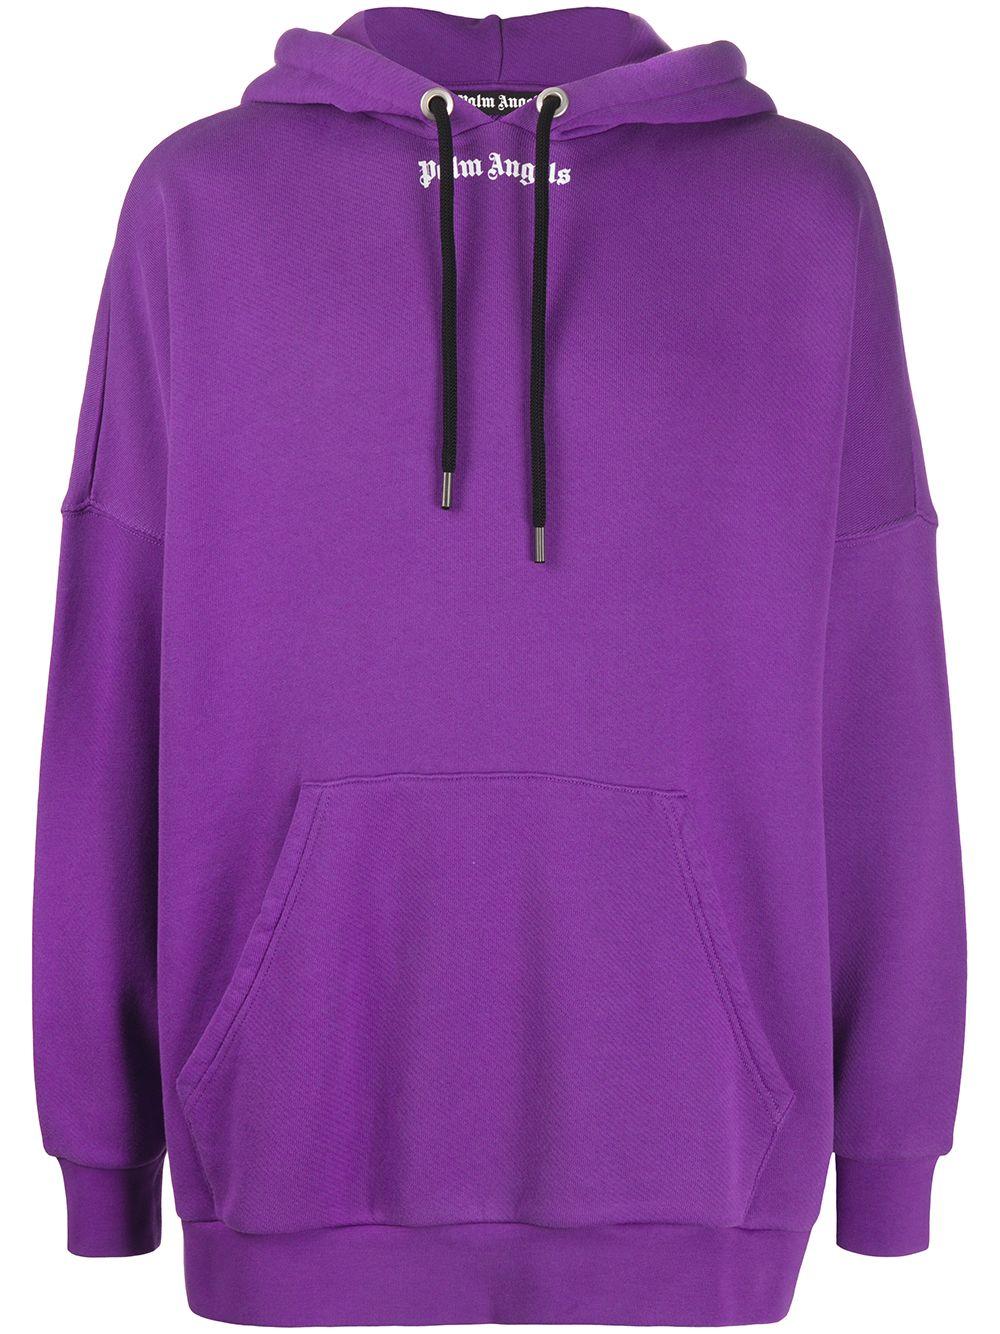 Palm Angels Cotton Logo-print Oversized Hoodie in Purple for Men - Lyst